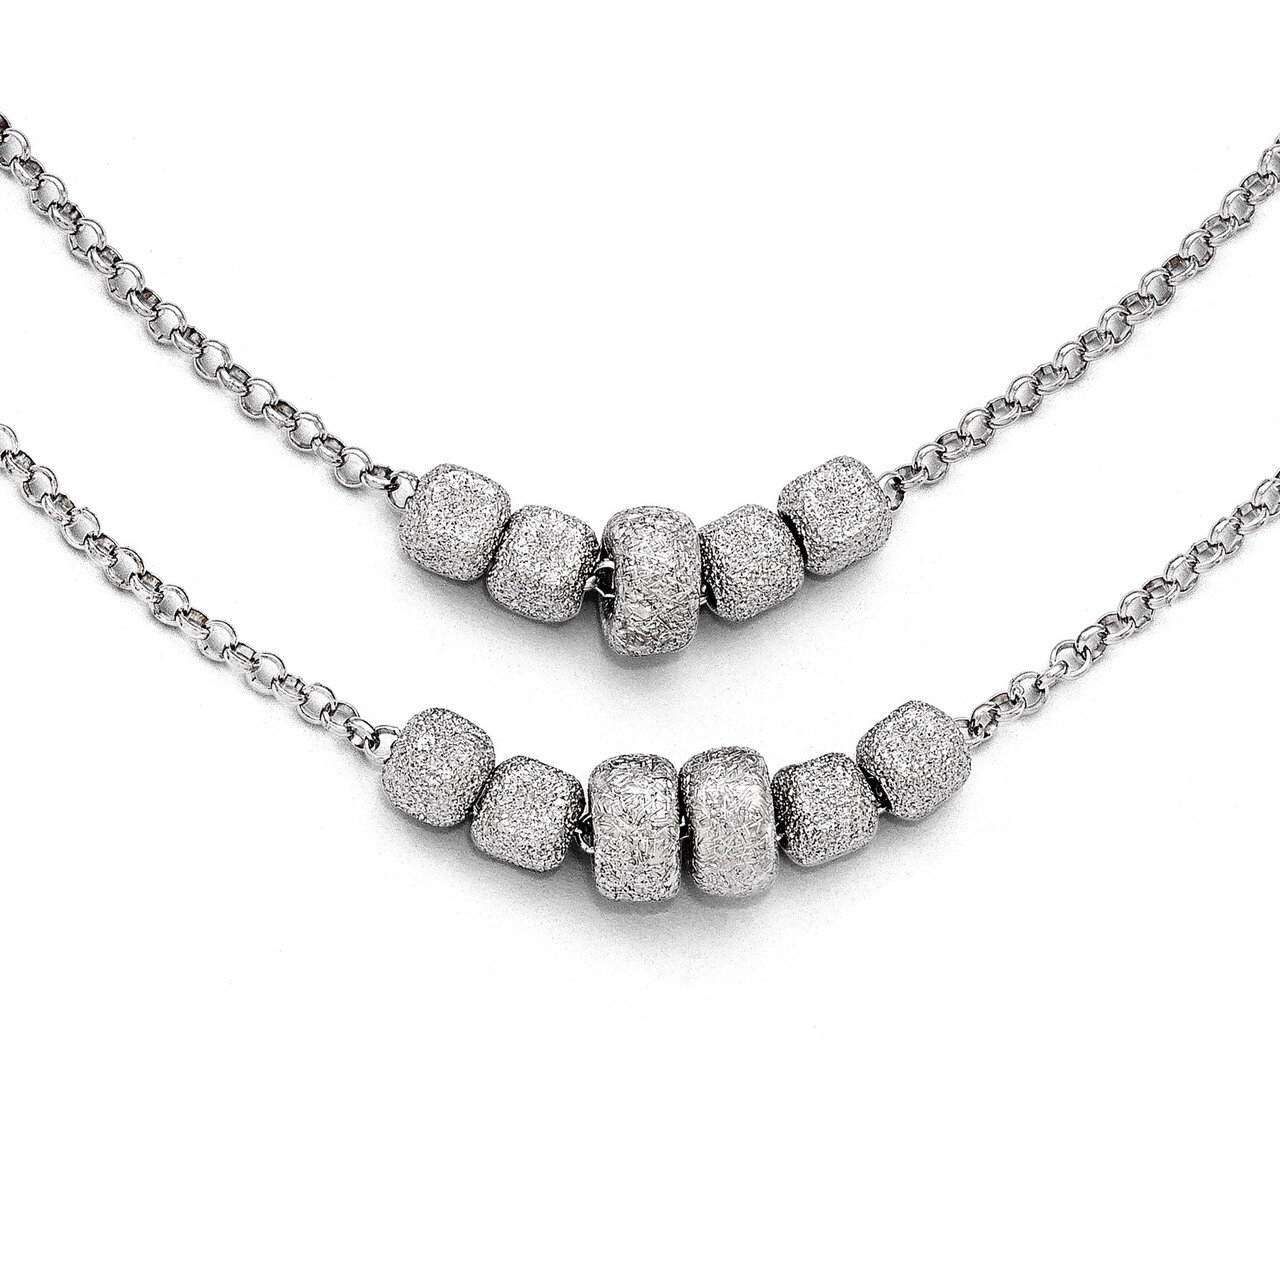 Diamond Cut Beaded Two Strand Necklace - Sterling Silver HB-QLF456-20